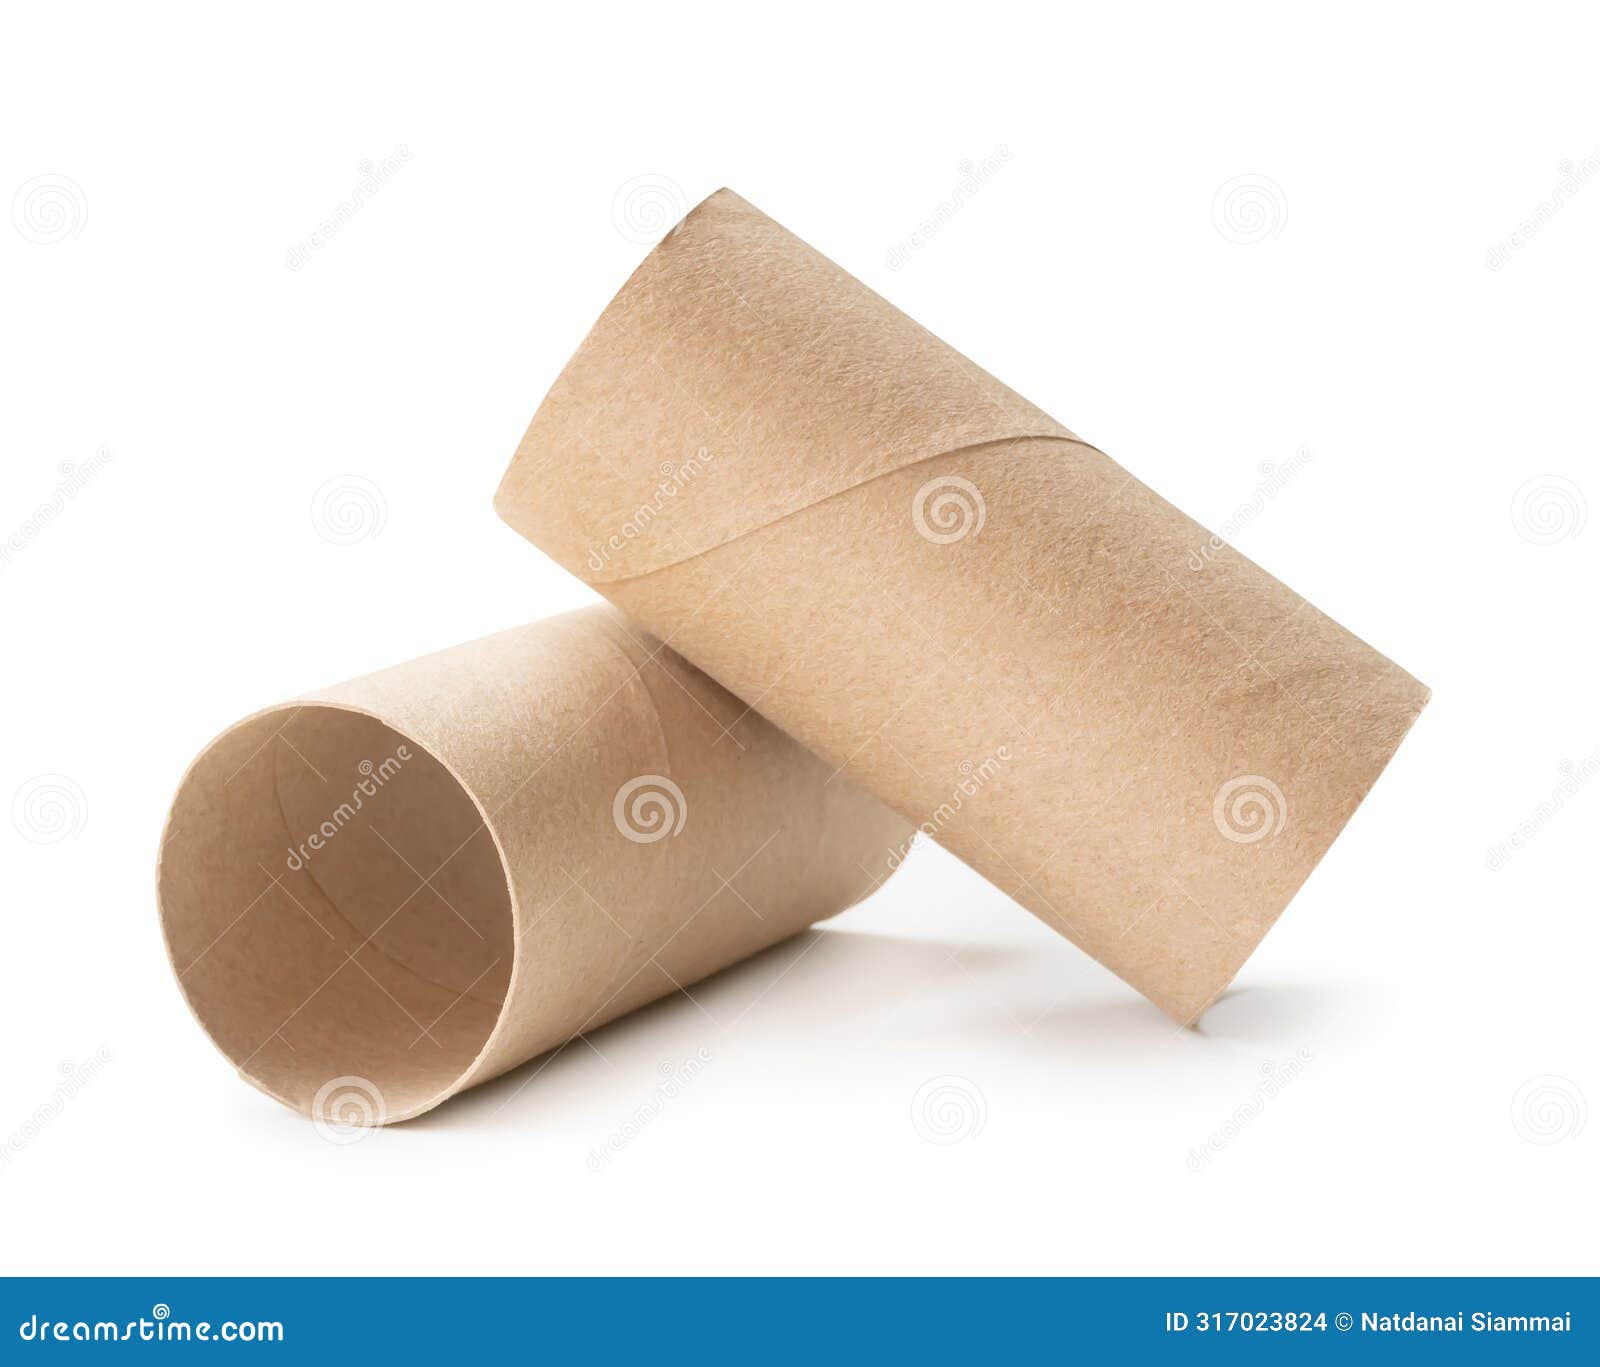 side view of brown tissue paper cores in stack  on white background with clipping path